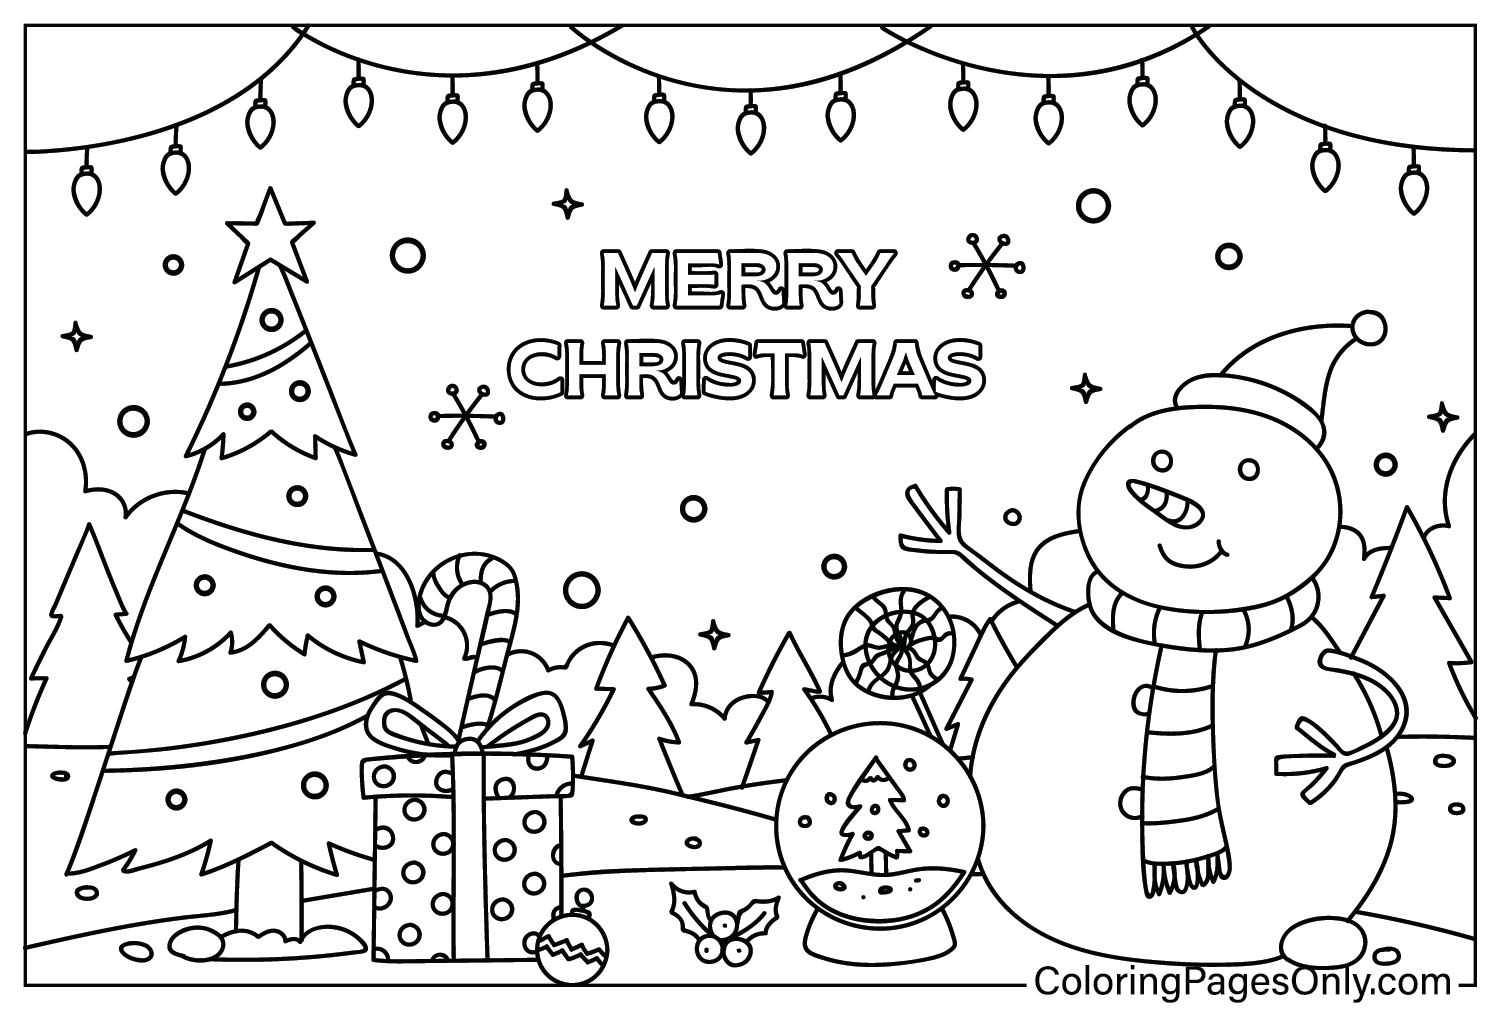 Free Printable Christmas Wallpaper Coloring Page from Christmas Wallpaper